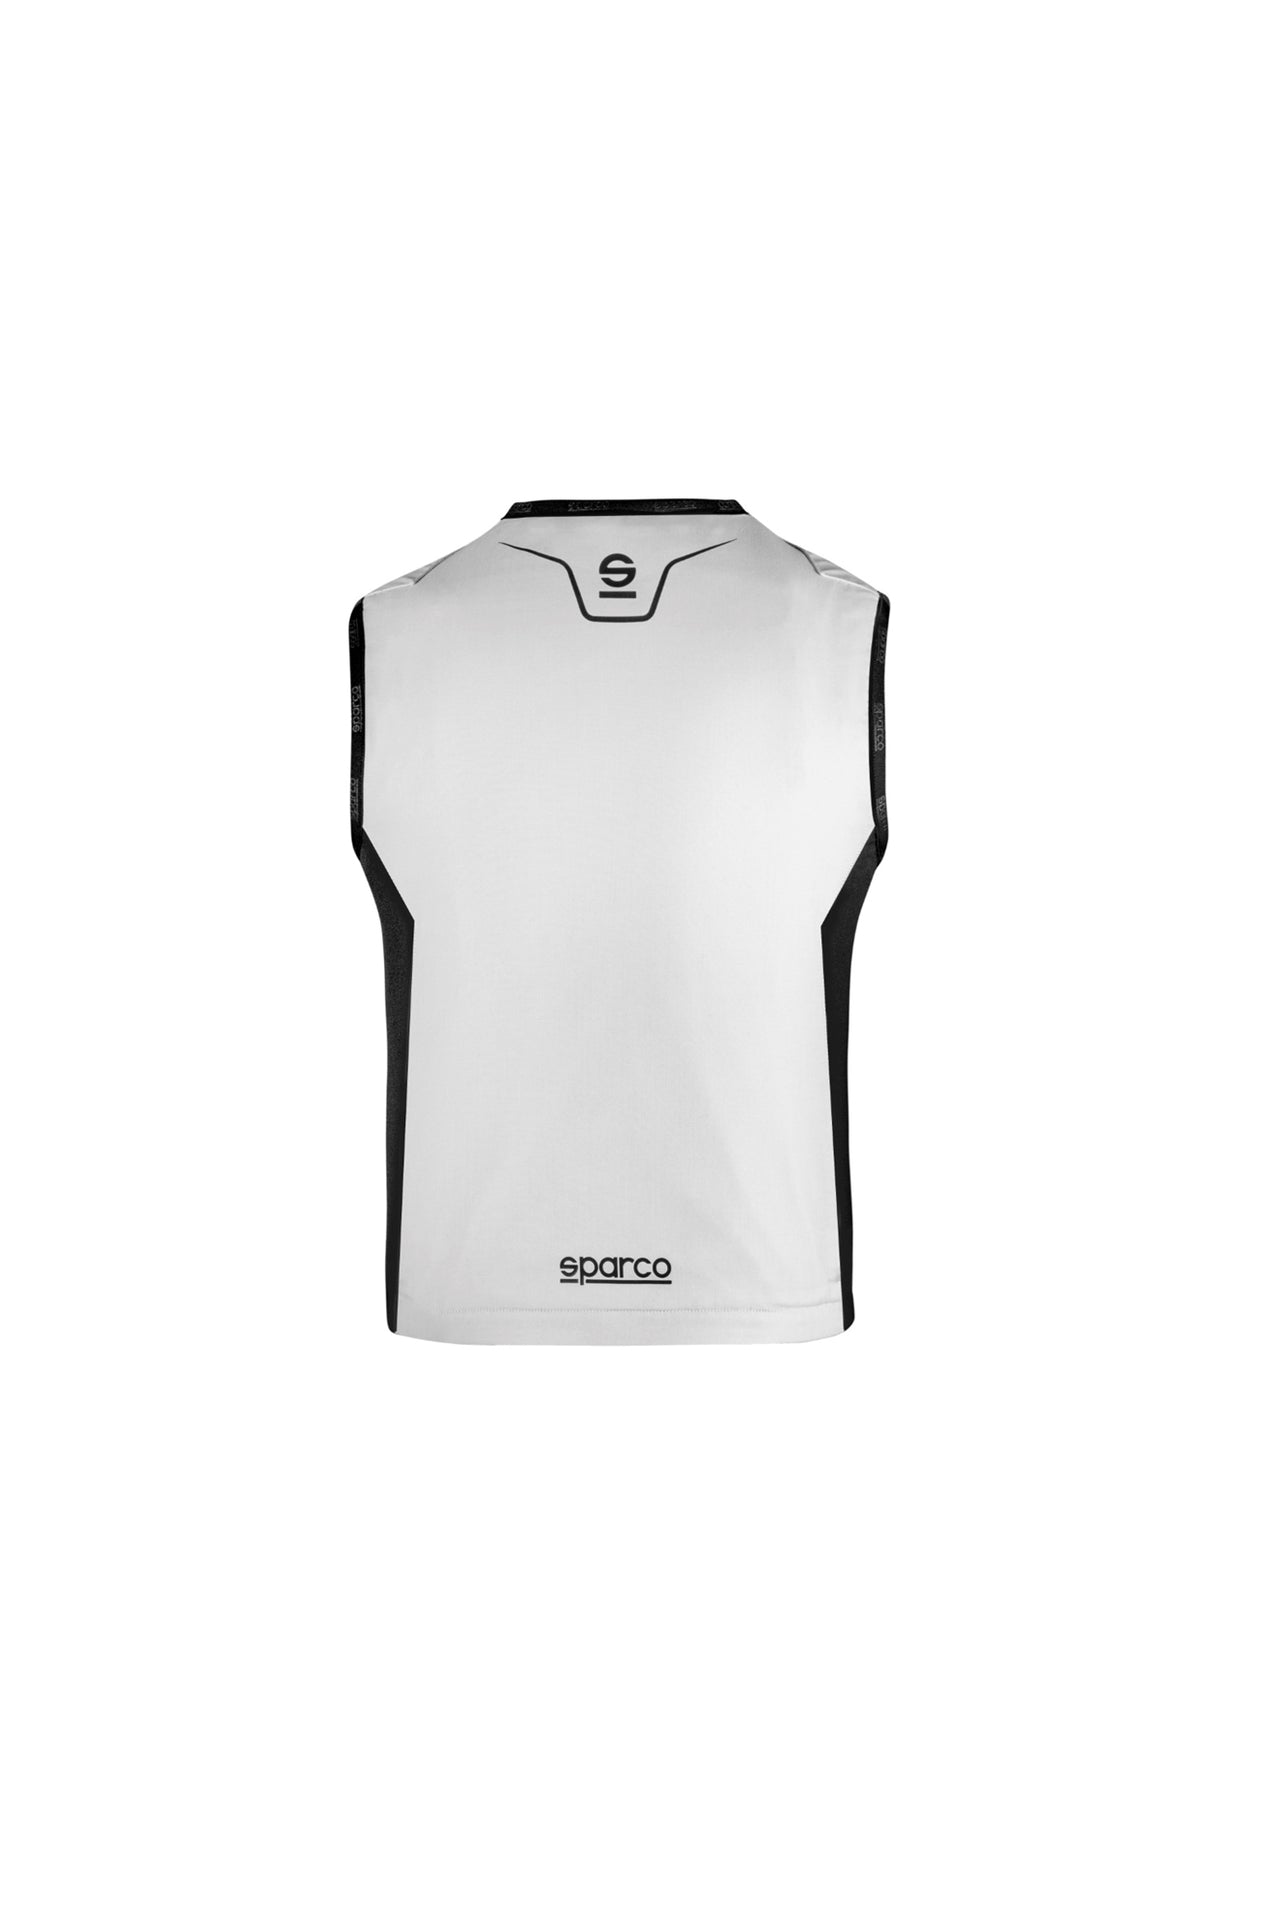 Sparco Ice Vest Driver Cooling from F1 Back